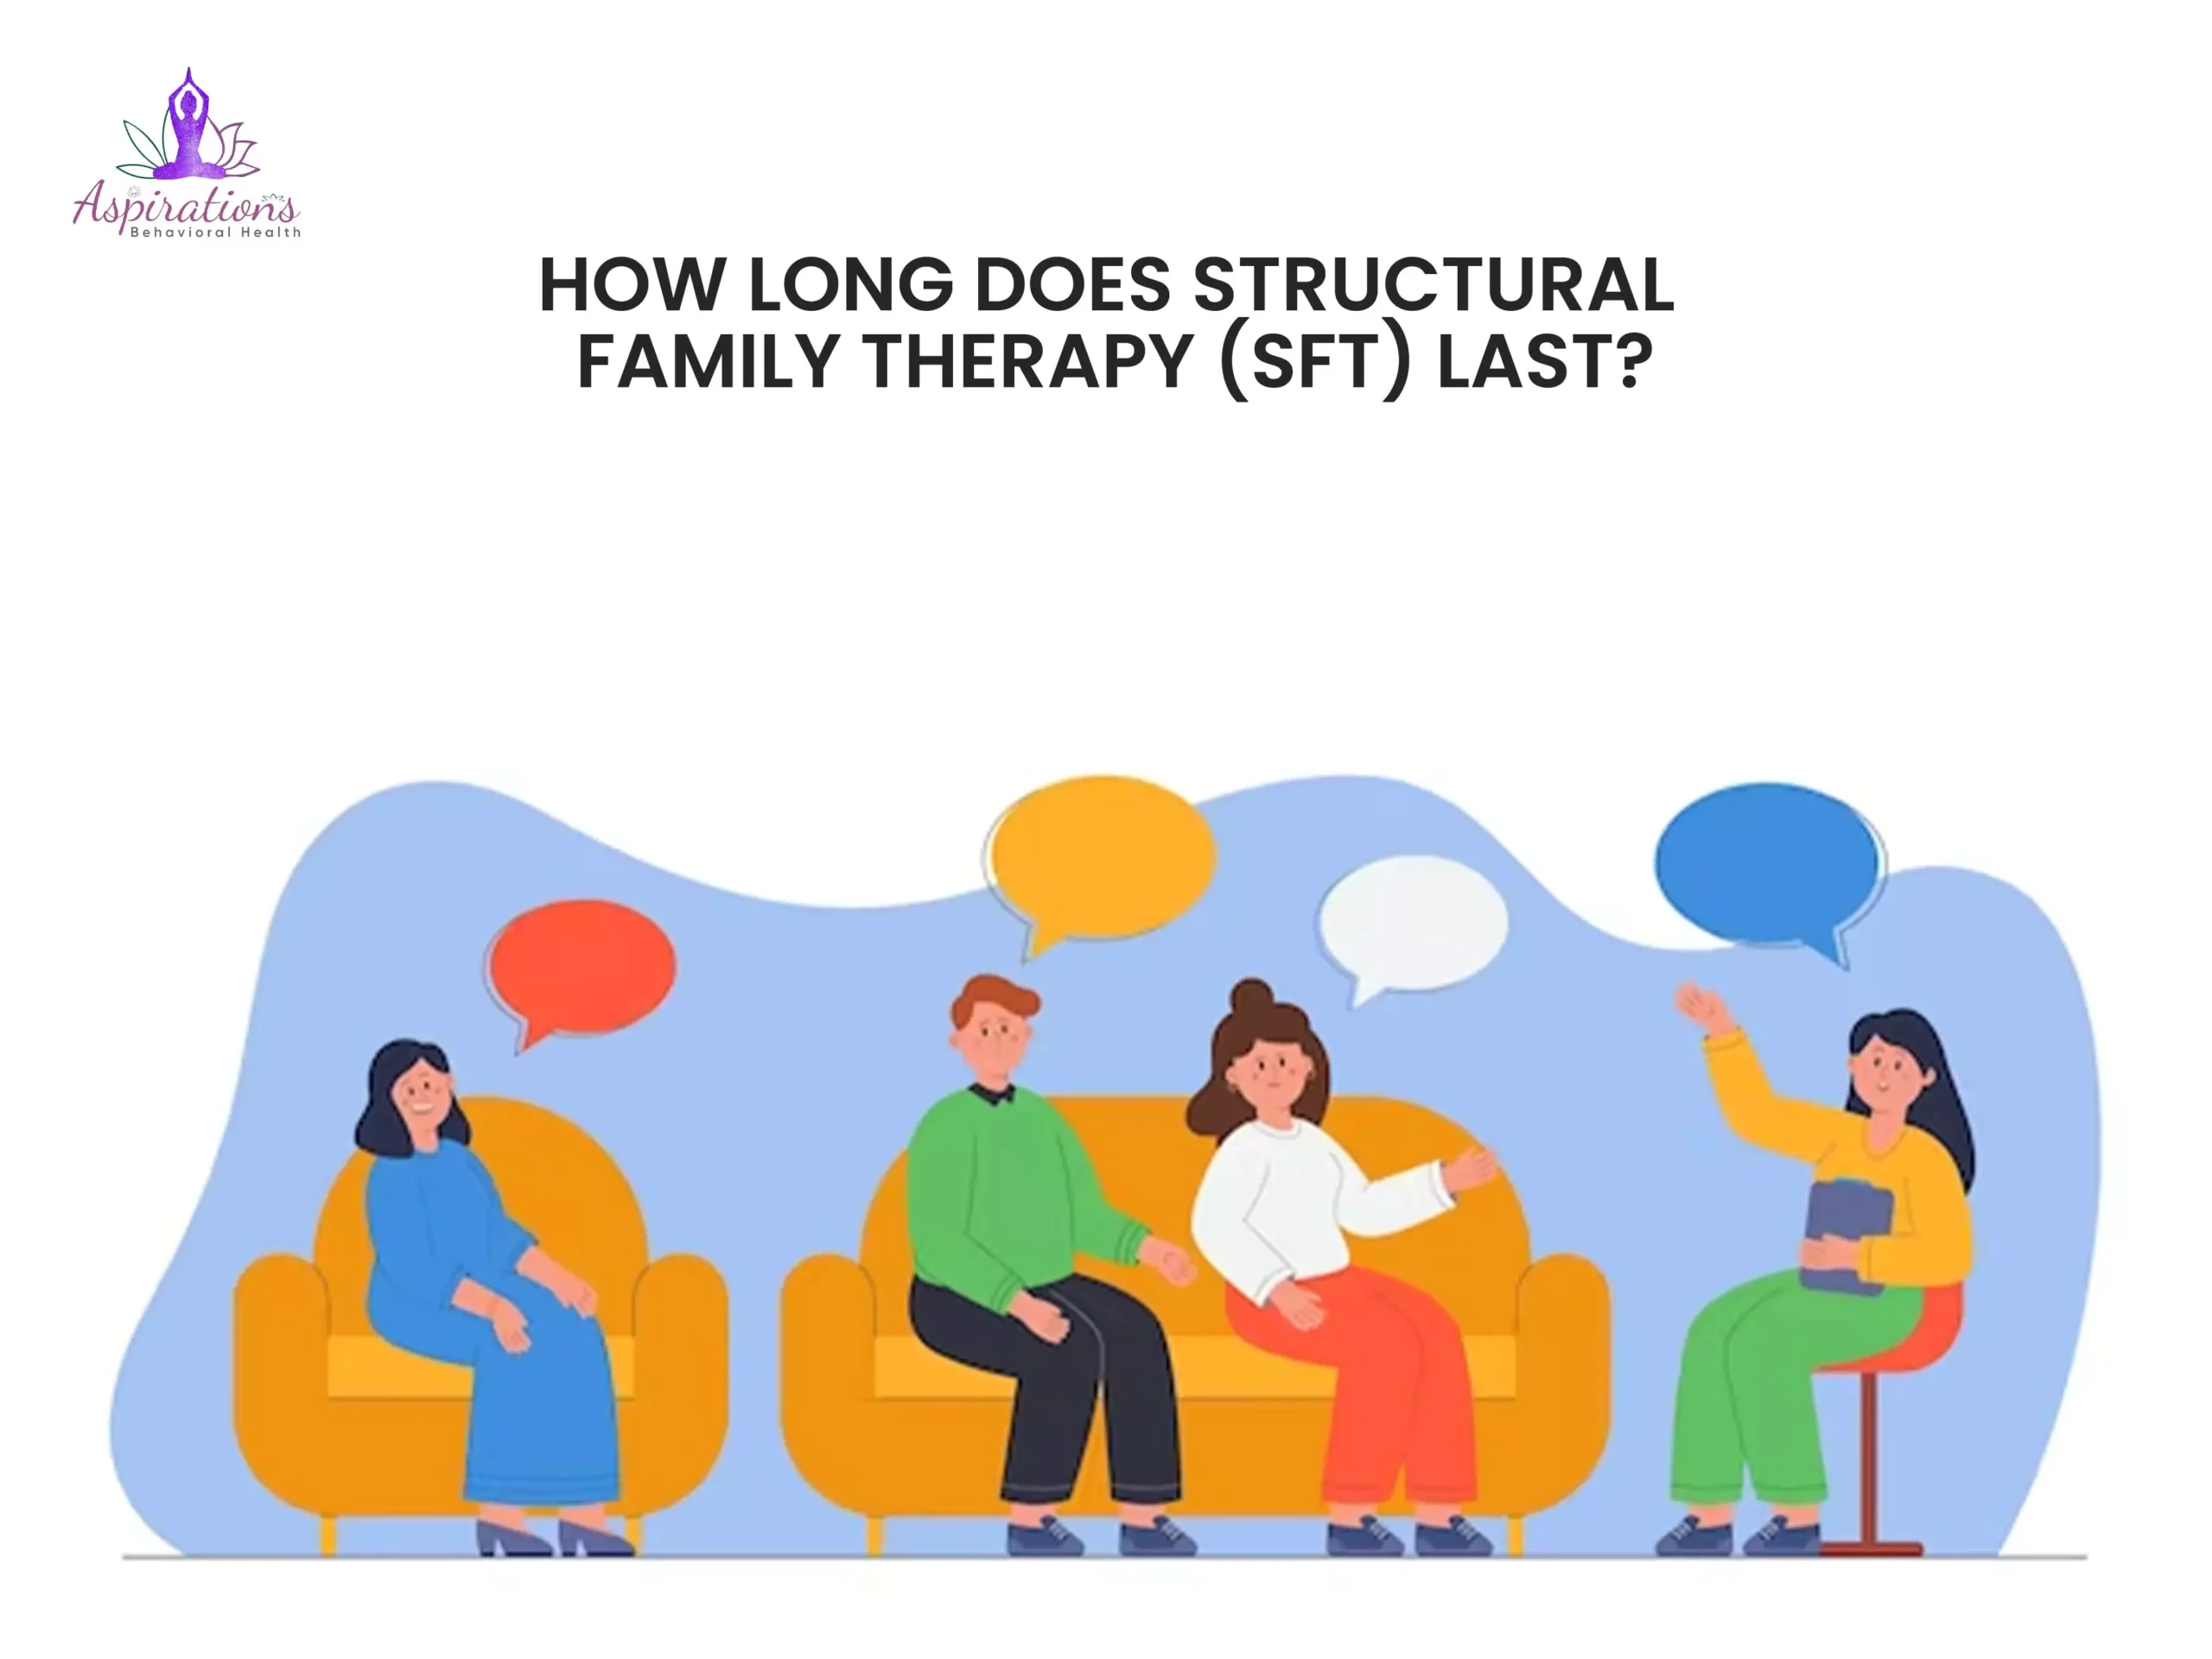 How Long Does Structural Family Therapy (SFT) Last?